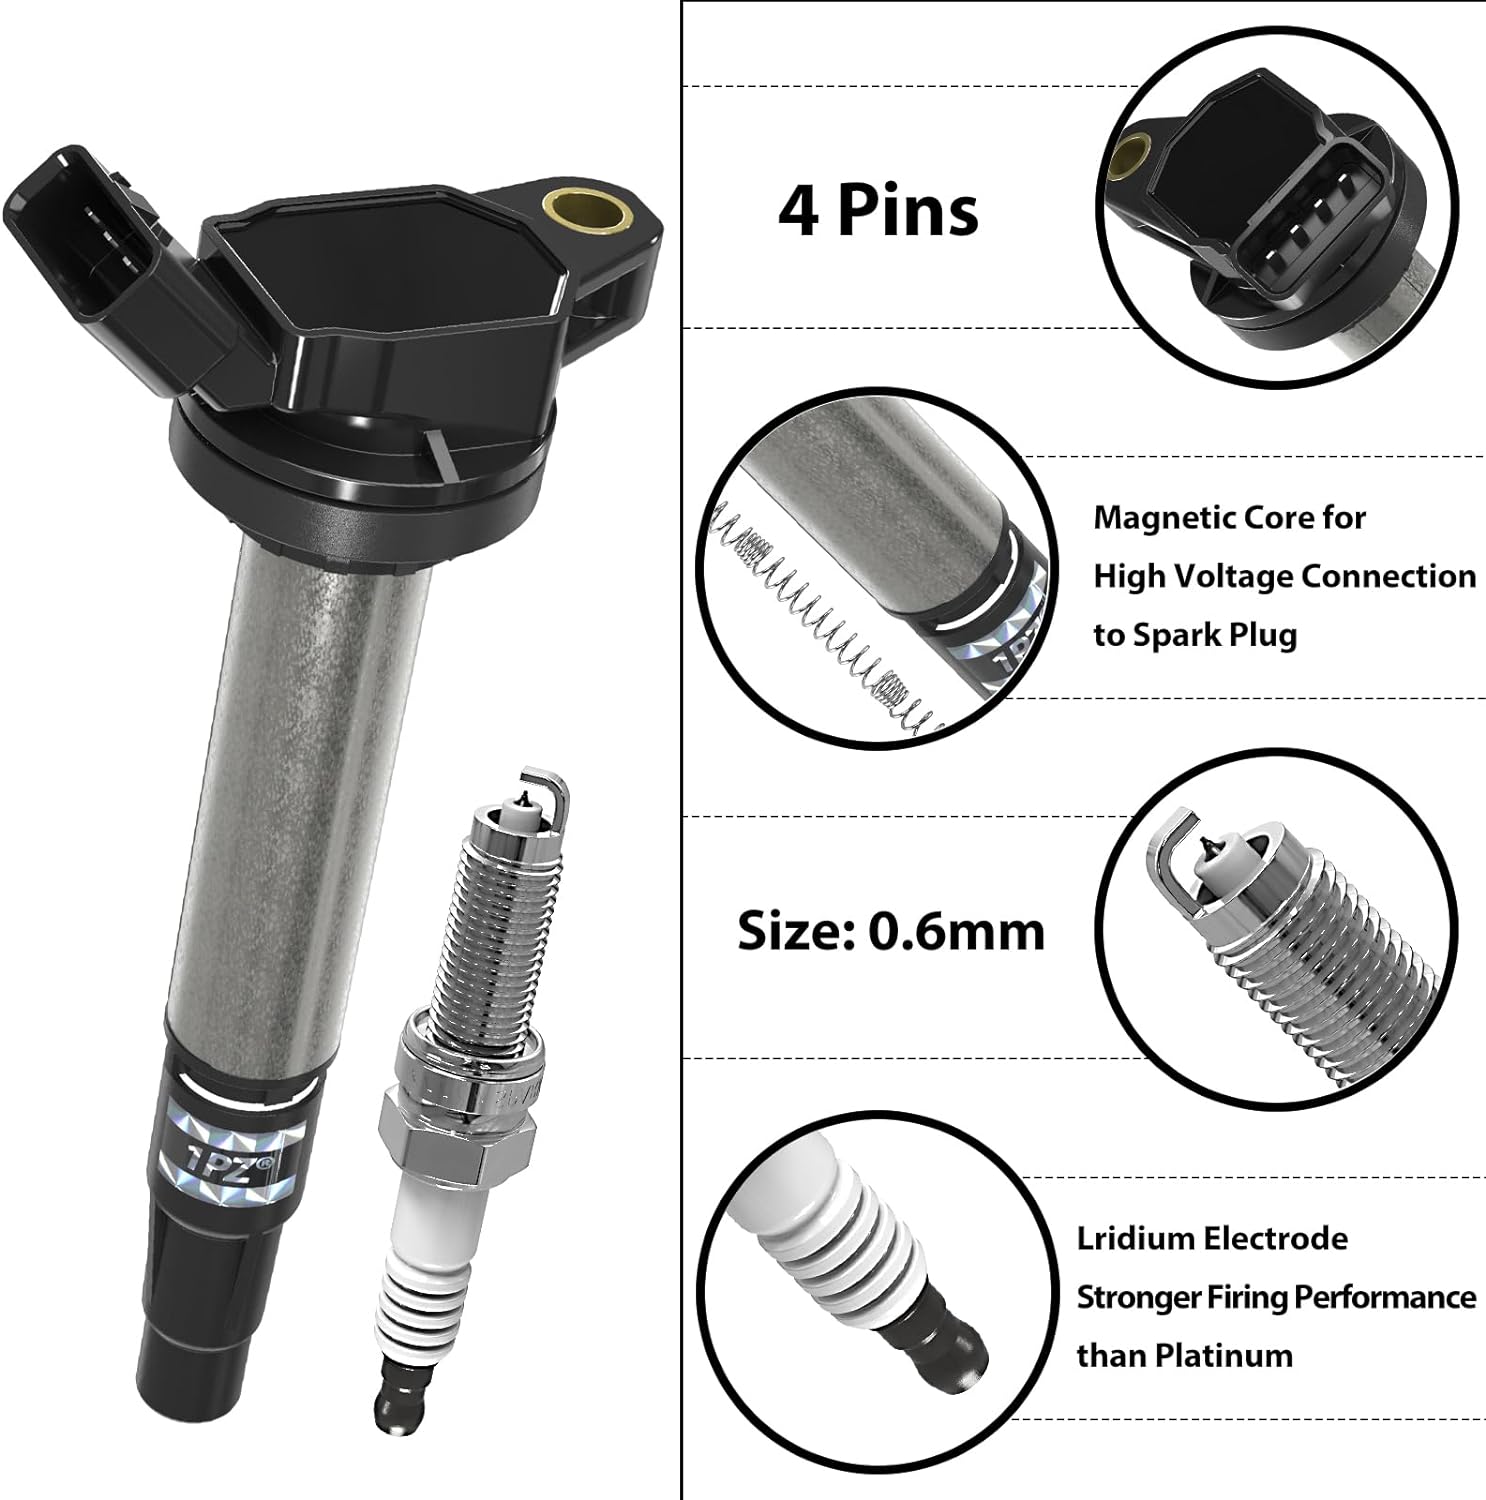 1PZ Ignition Coil Pack UF596 and Iridium Spark Plugs 93501 Set of 4 Replacement for Toyota Prius Corolla Matrix V CT200H XD 1.8L L4 Compatible with 90919-02258